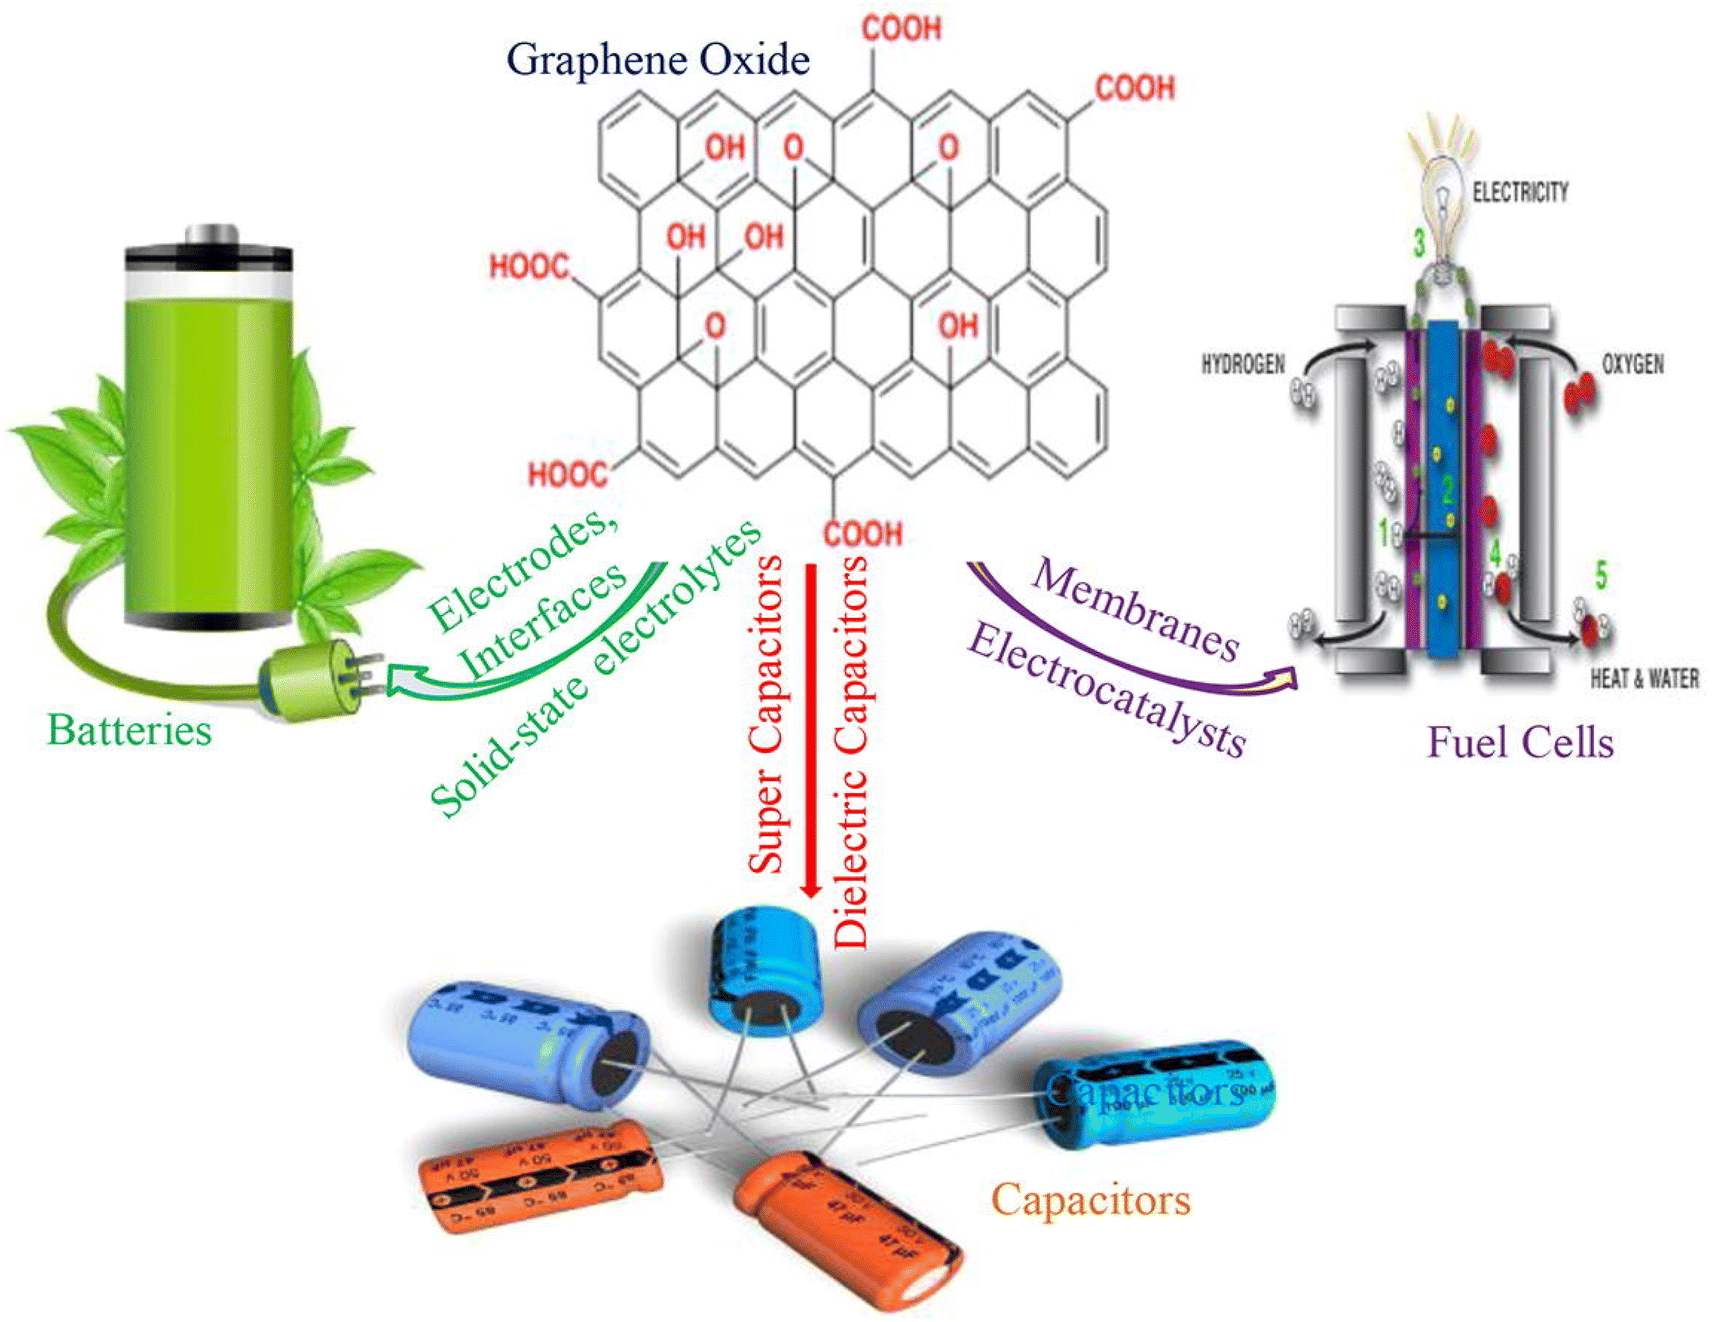 Recent advances in energy storage with graphene oxide for supercapacitor  technology - Sustainable Energy & Fuels (RSC Publishing)  DOI:10.1039/D3SE00867C